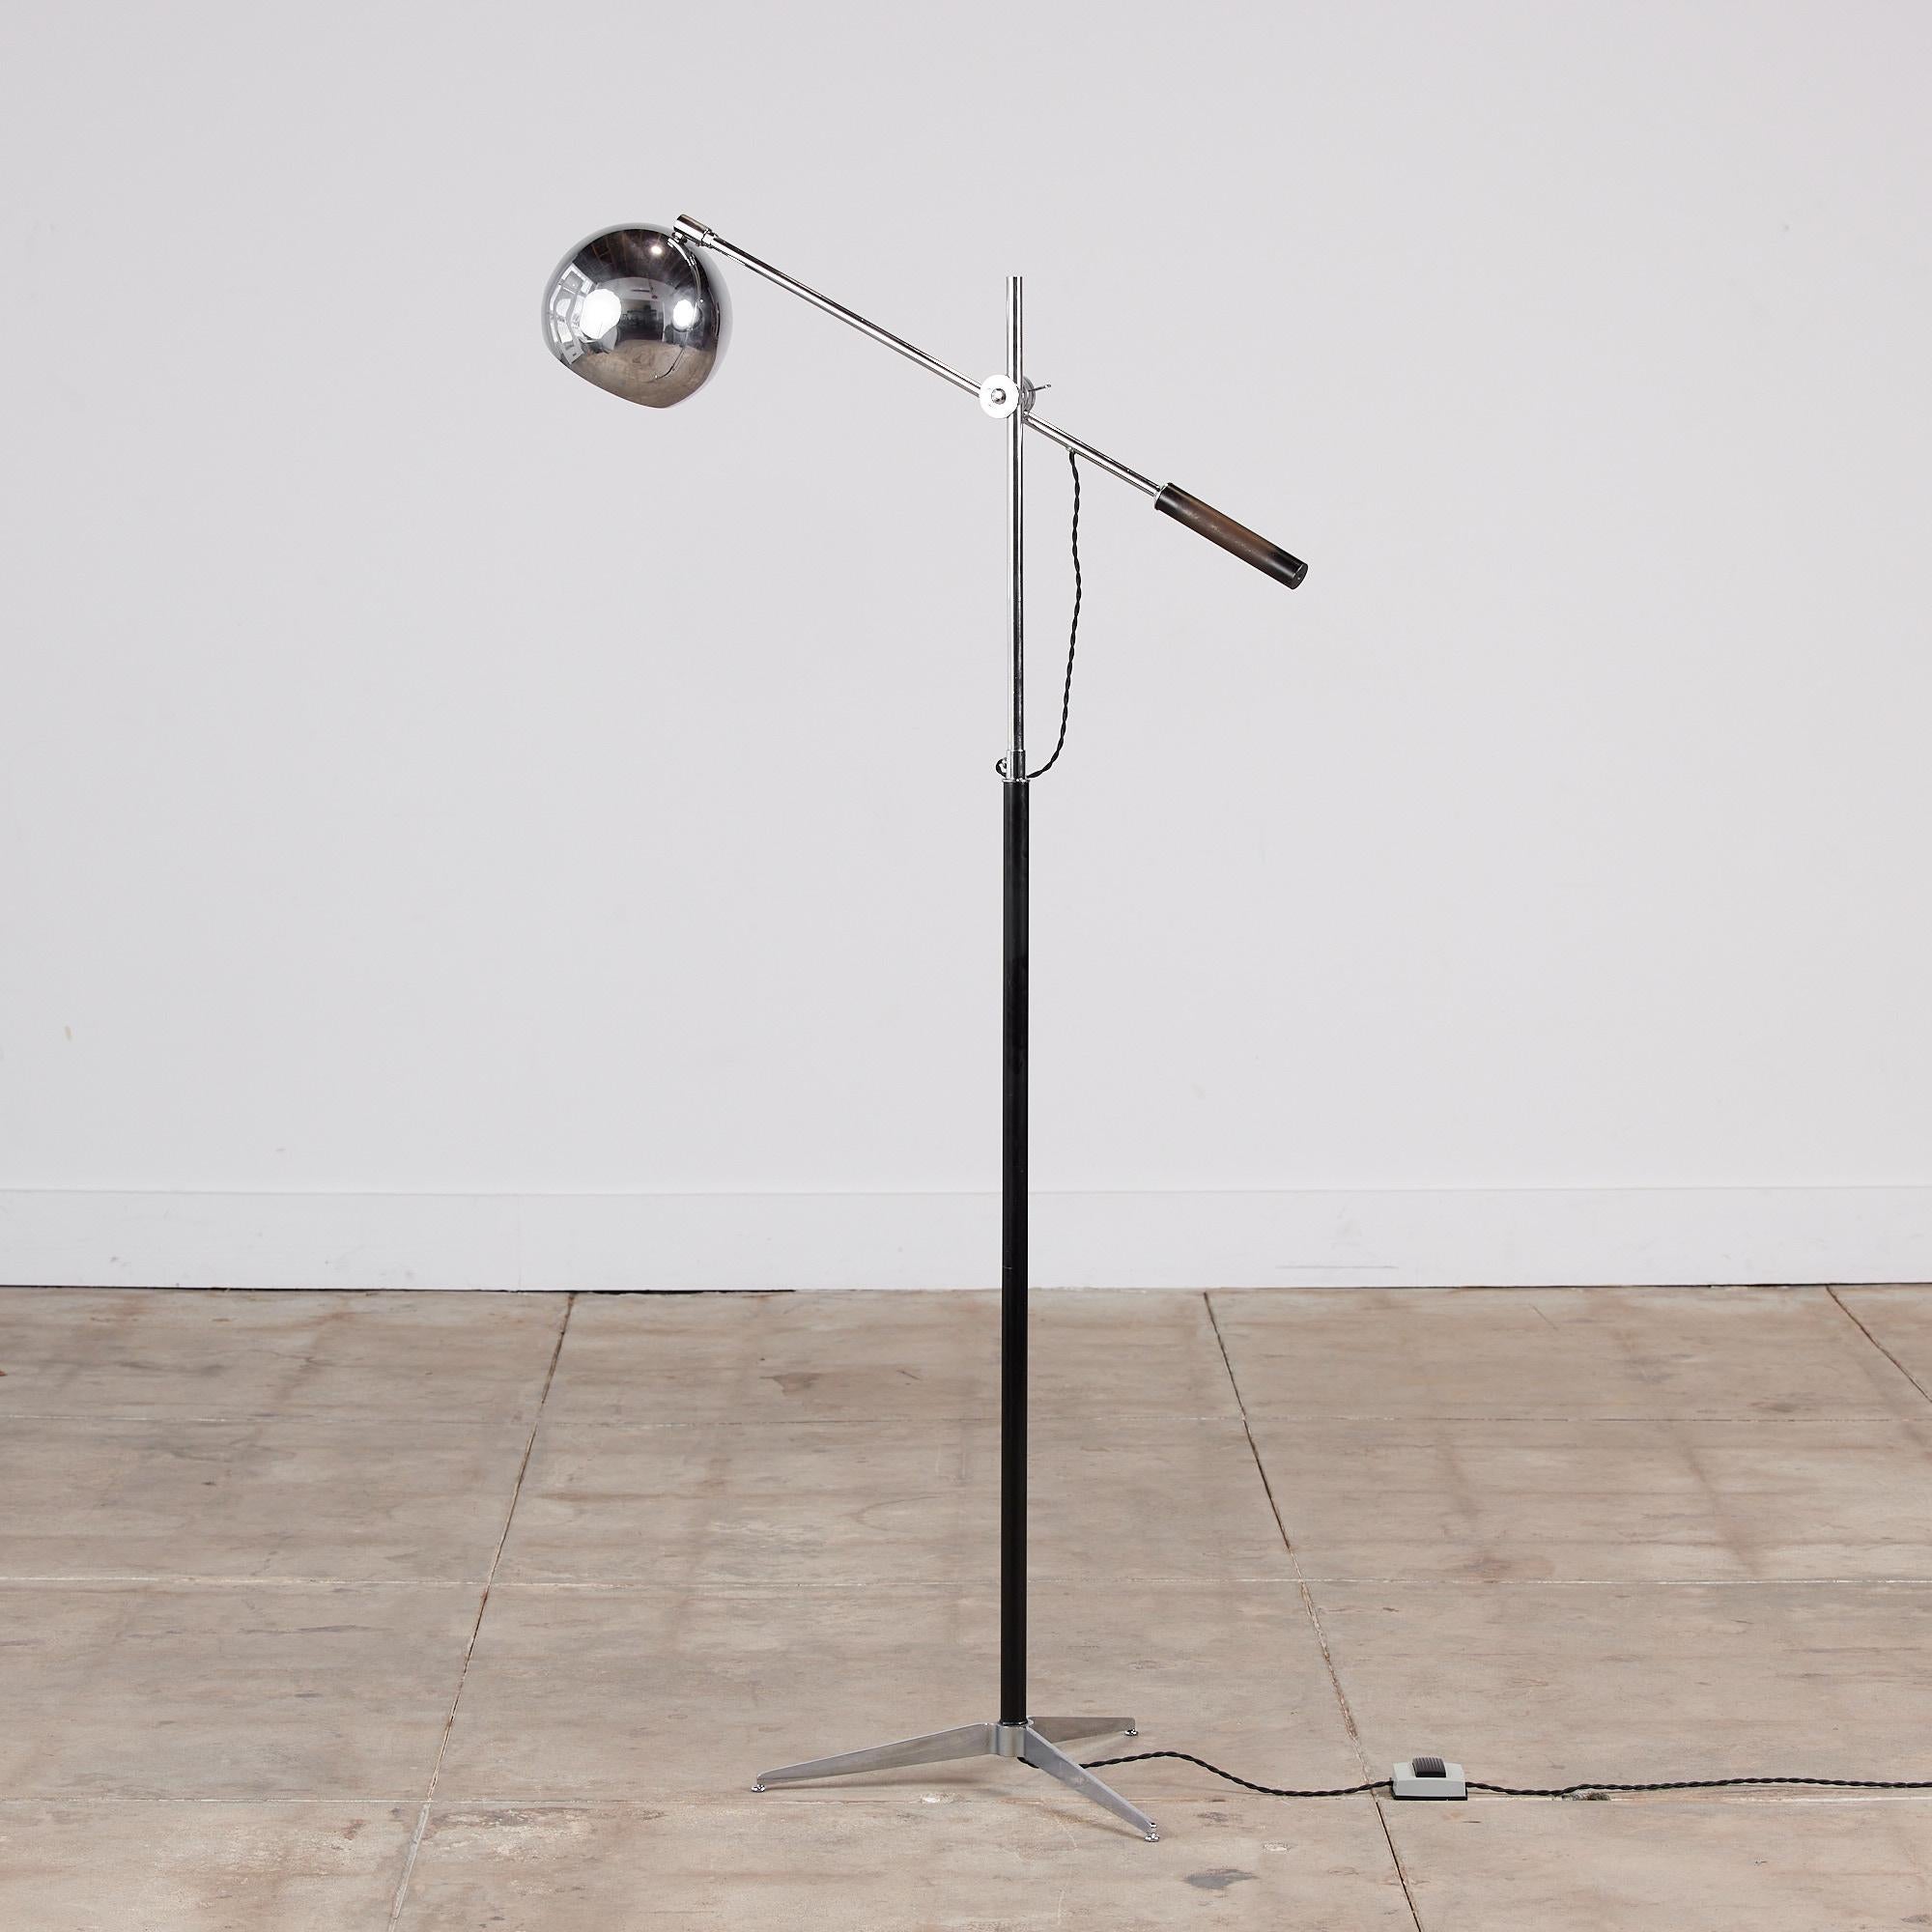 Robert Sonneman eyeball floor lamp c.1960s, USA. The lamp features a chrome sphere shade on a pivoting arm that can be adjusted to multiple vertical heights with cylindrical black handle. The stem of the lamp is a narrow chrome and black cylindrical